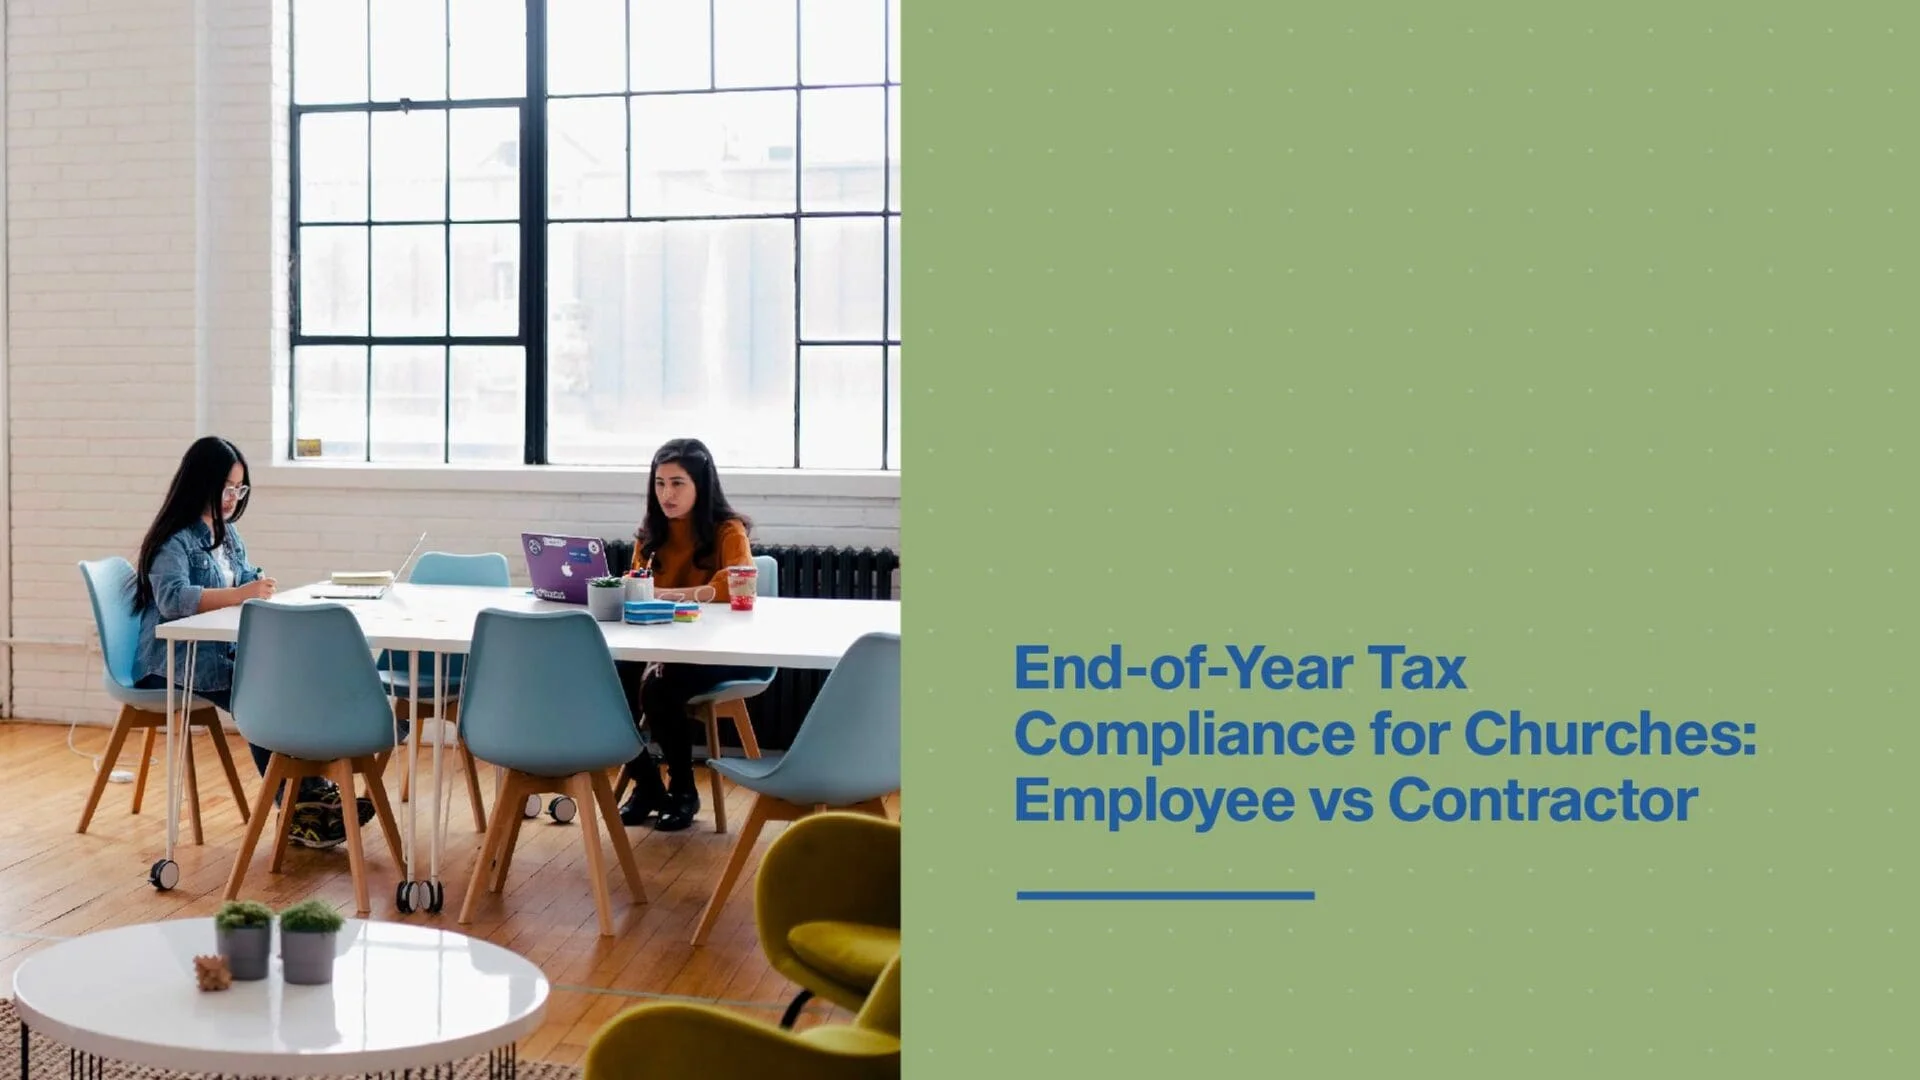 Contractor vs Employee: Addressing Tax Compliance as a Church.